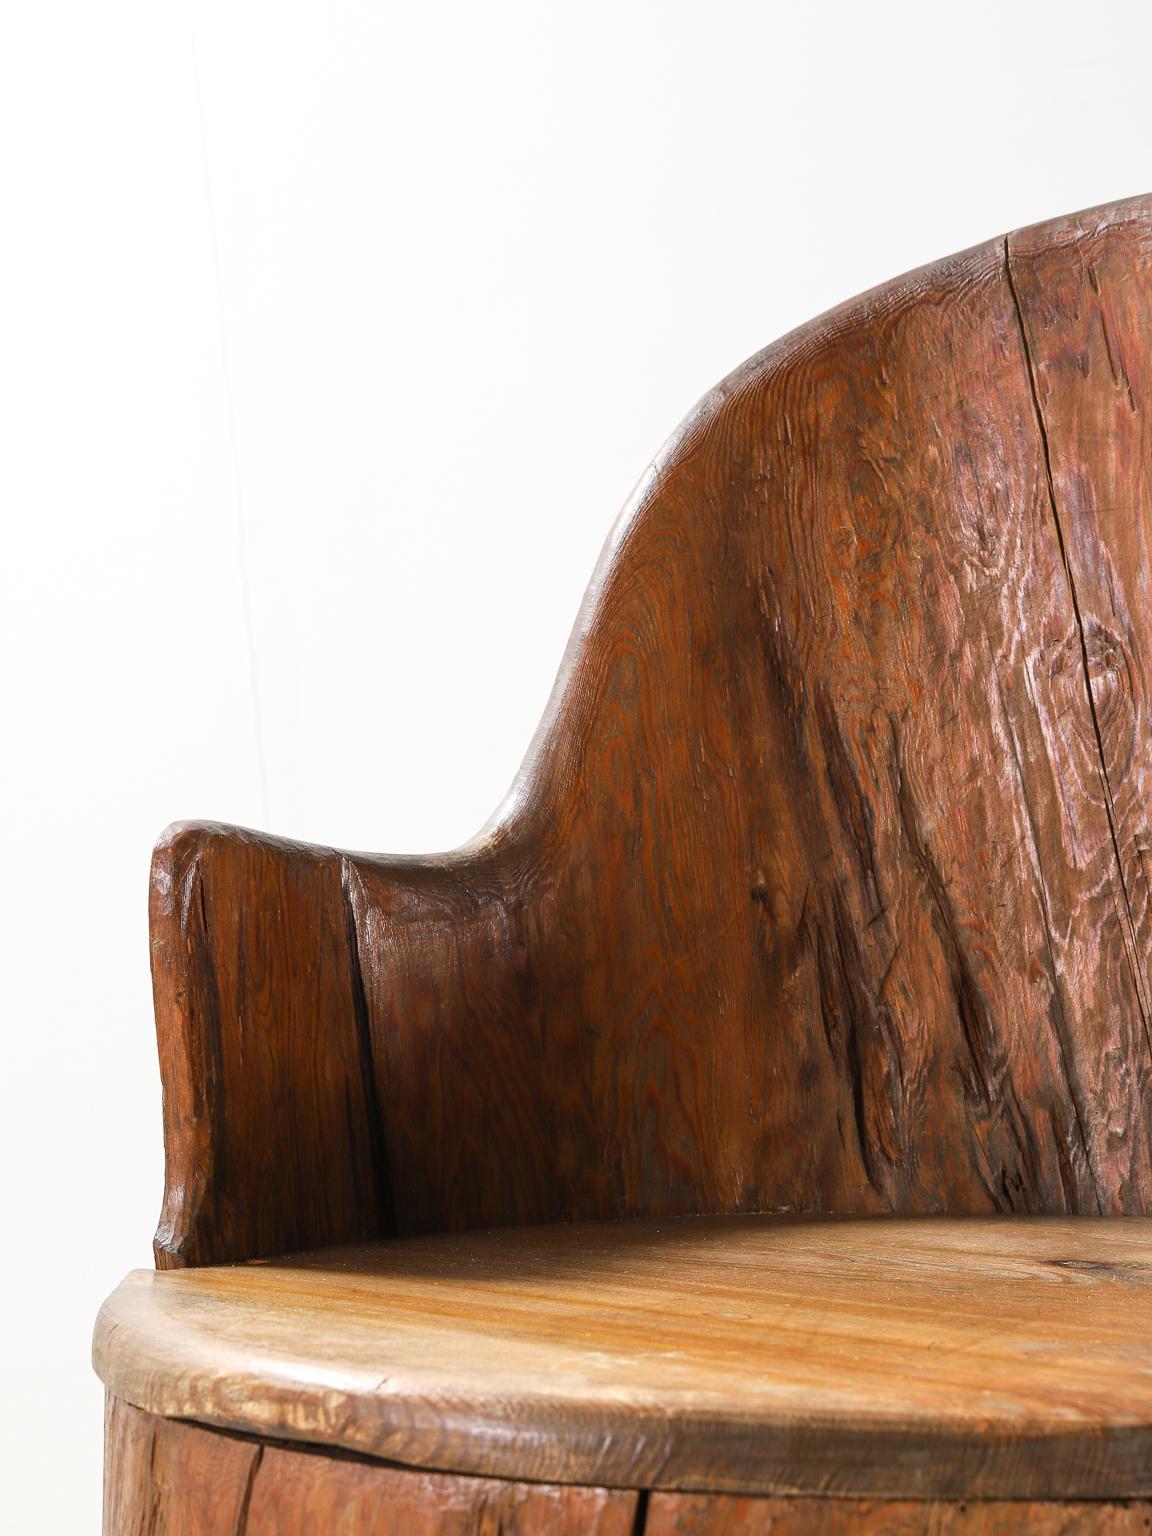 Swedish 19th Century Classic Dug-Out Pine Trunk Chair or 'Kubbstol' In Good Condition In London, Charterhouse Square